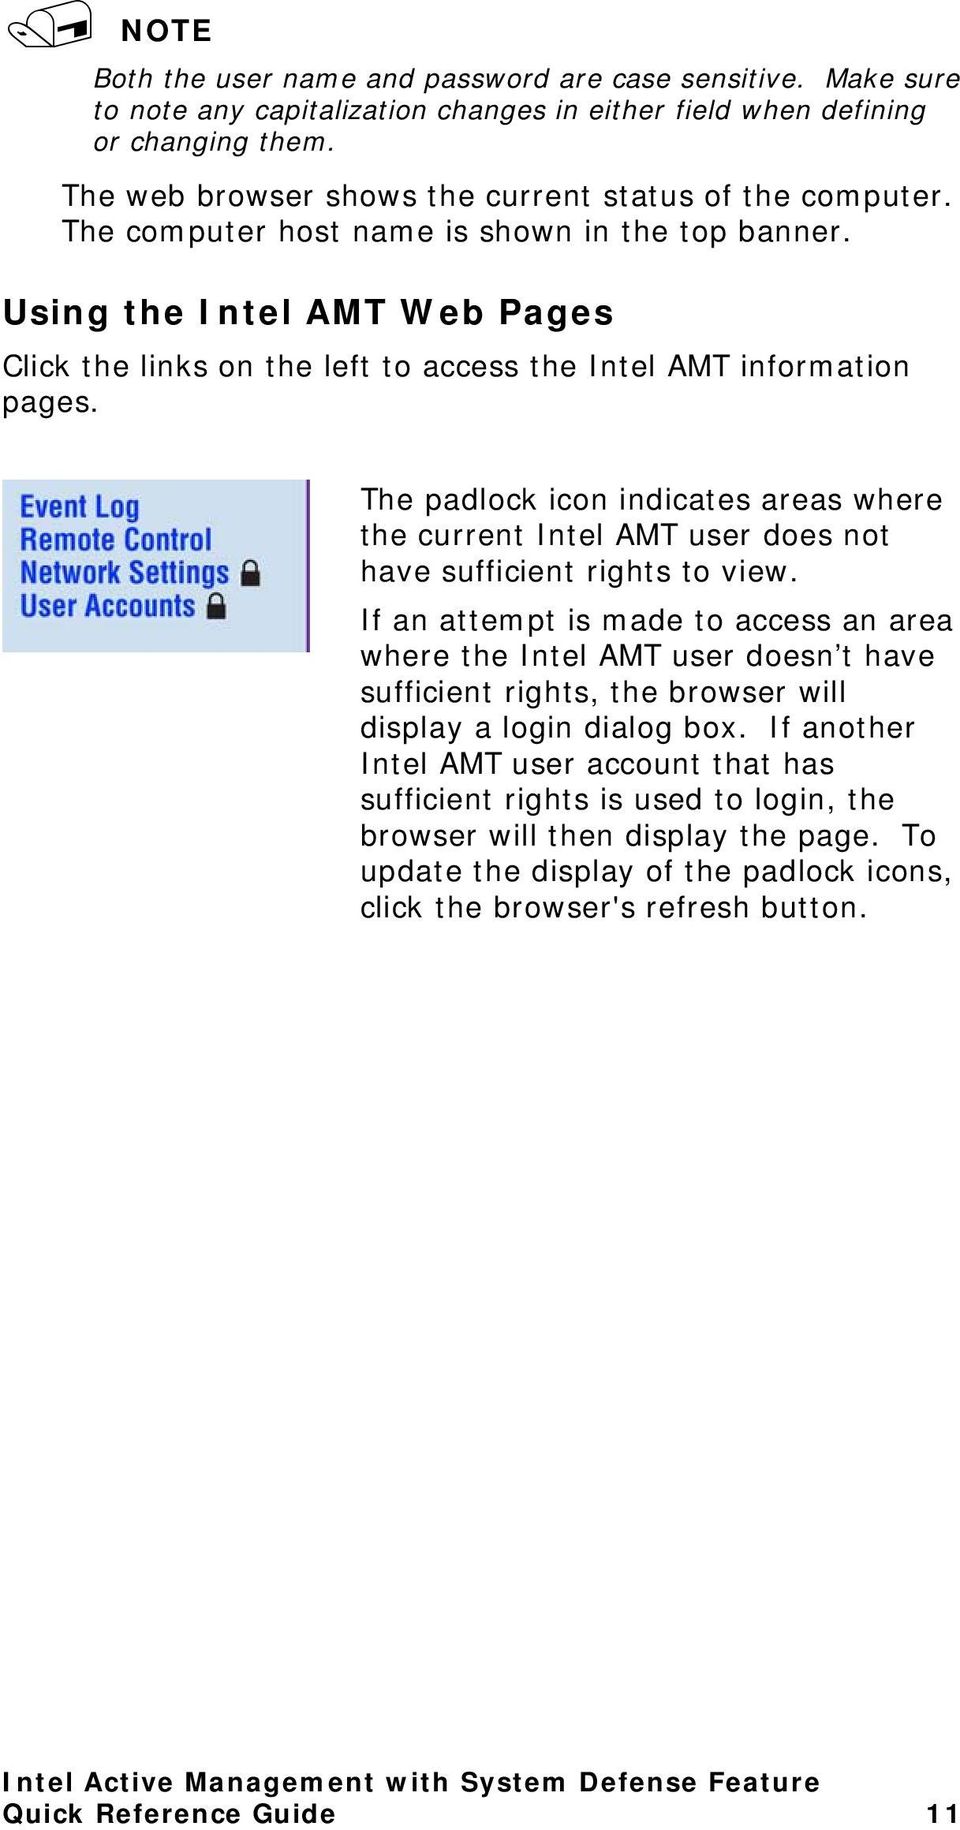 Using the Intel AMT Web Pages Click the links on the left to access the Intel AMT information pages.